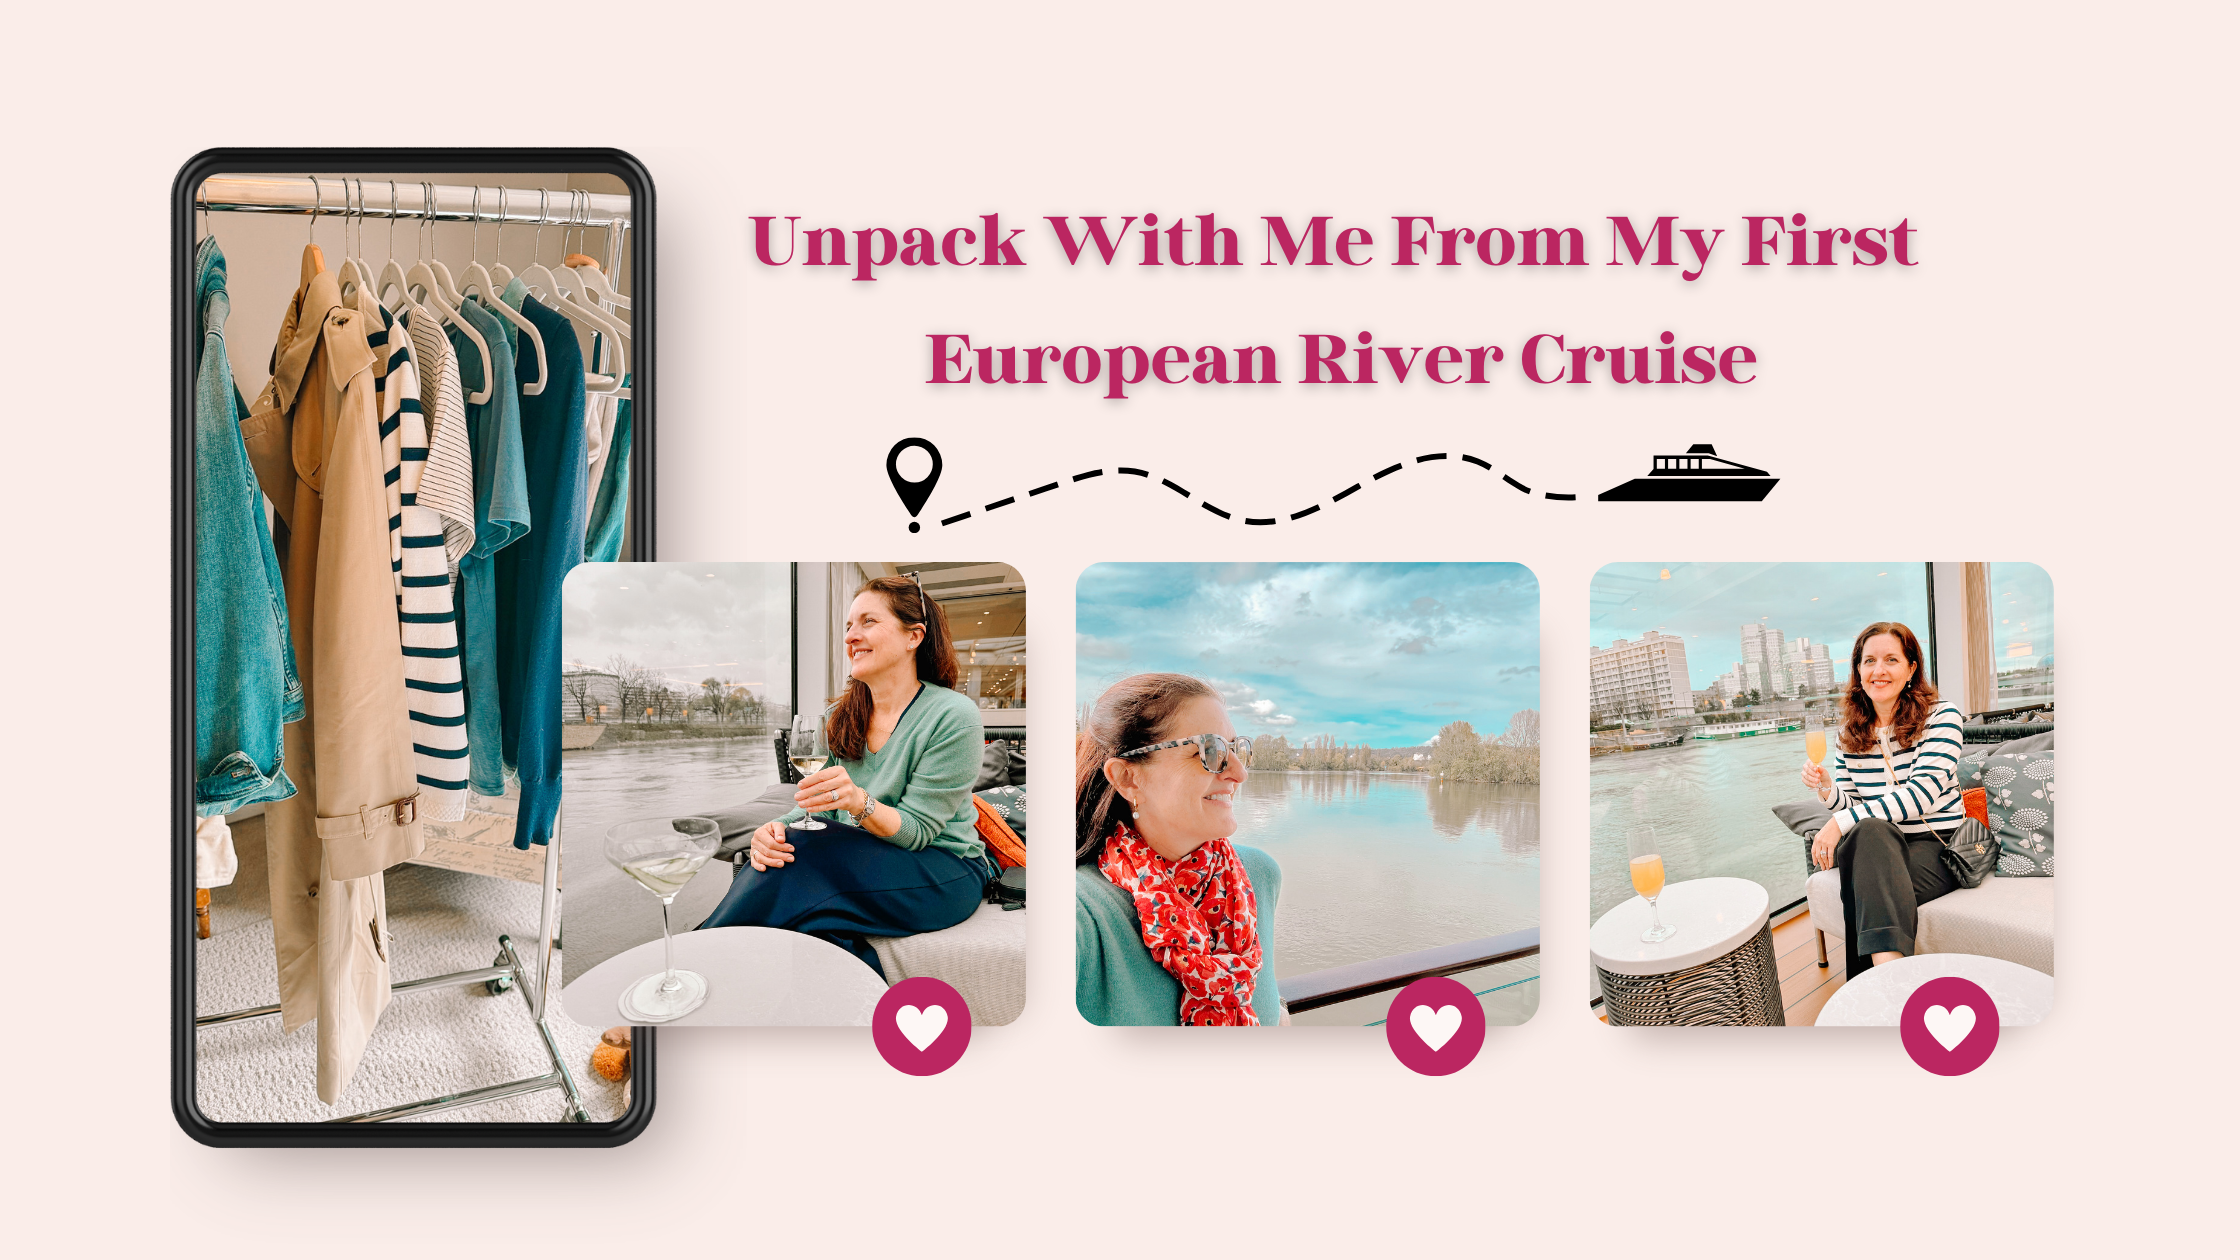 Unpack With Me From My First European River Cruise